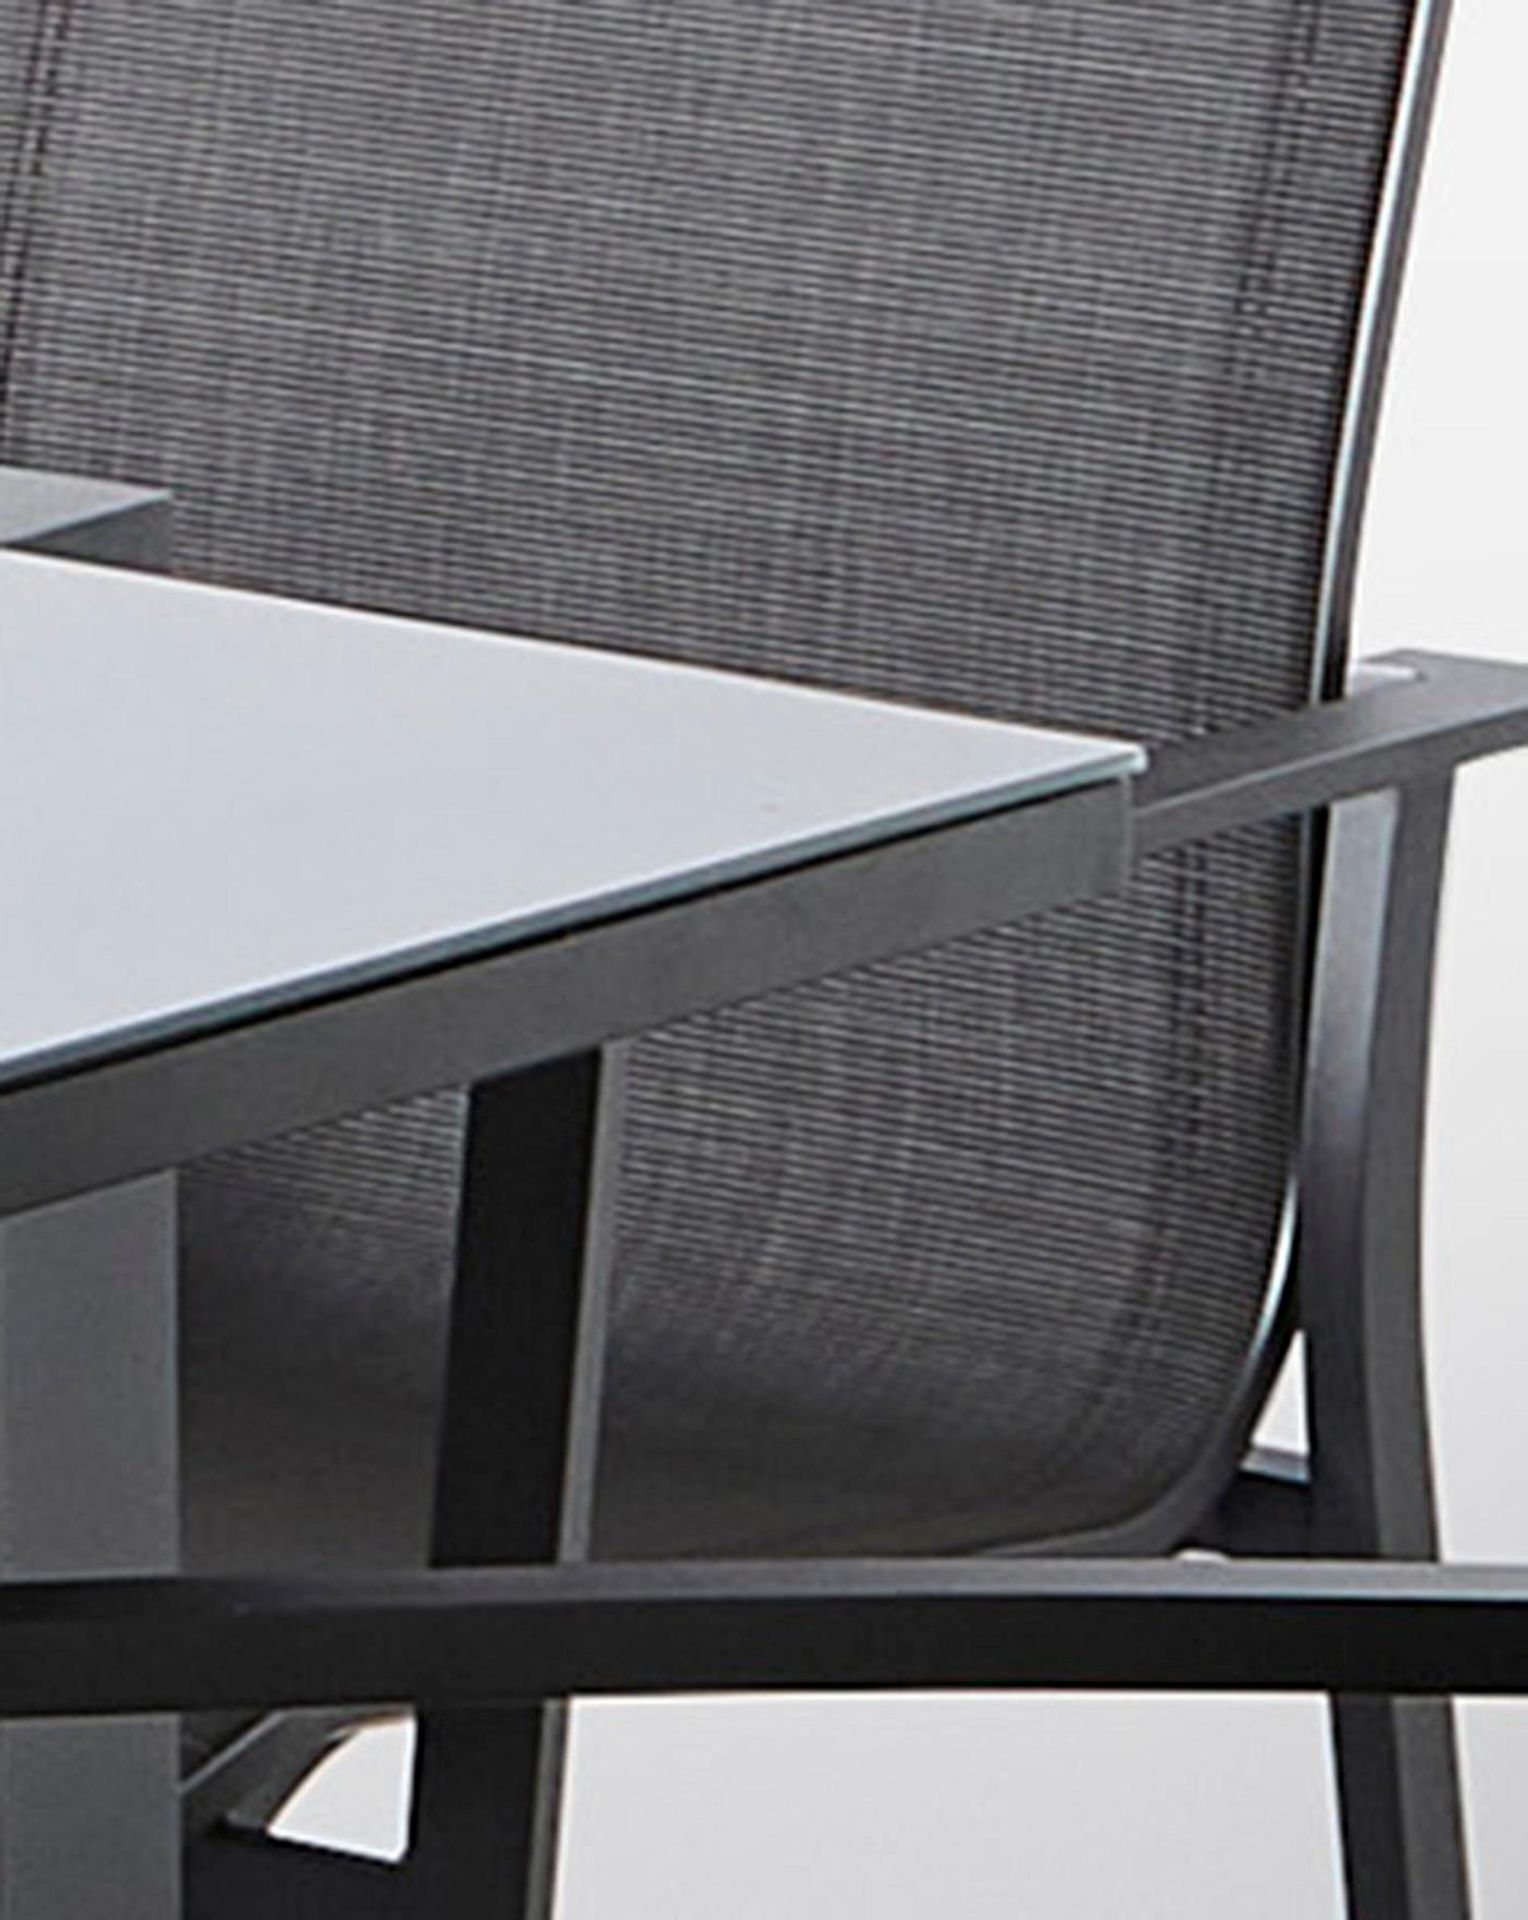 BRAND NEW Oslo 6 Seater Dining Set with Extendable Table. RRP £699 EACH. The Oslo Dining Set with - Image 2 of 4